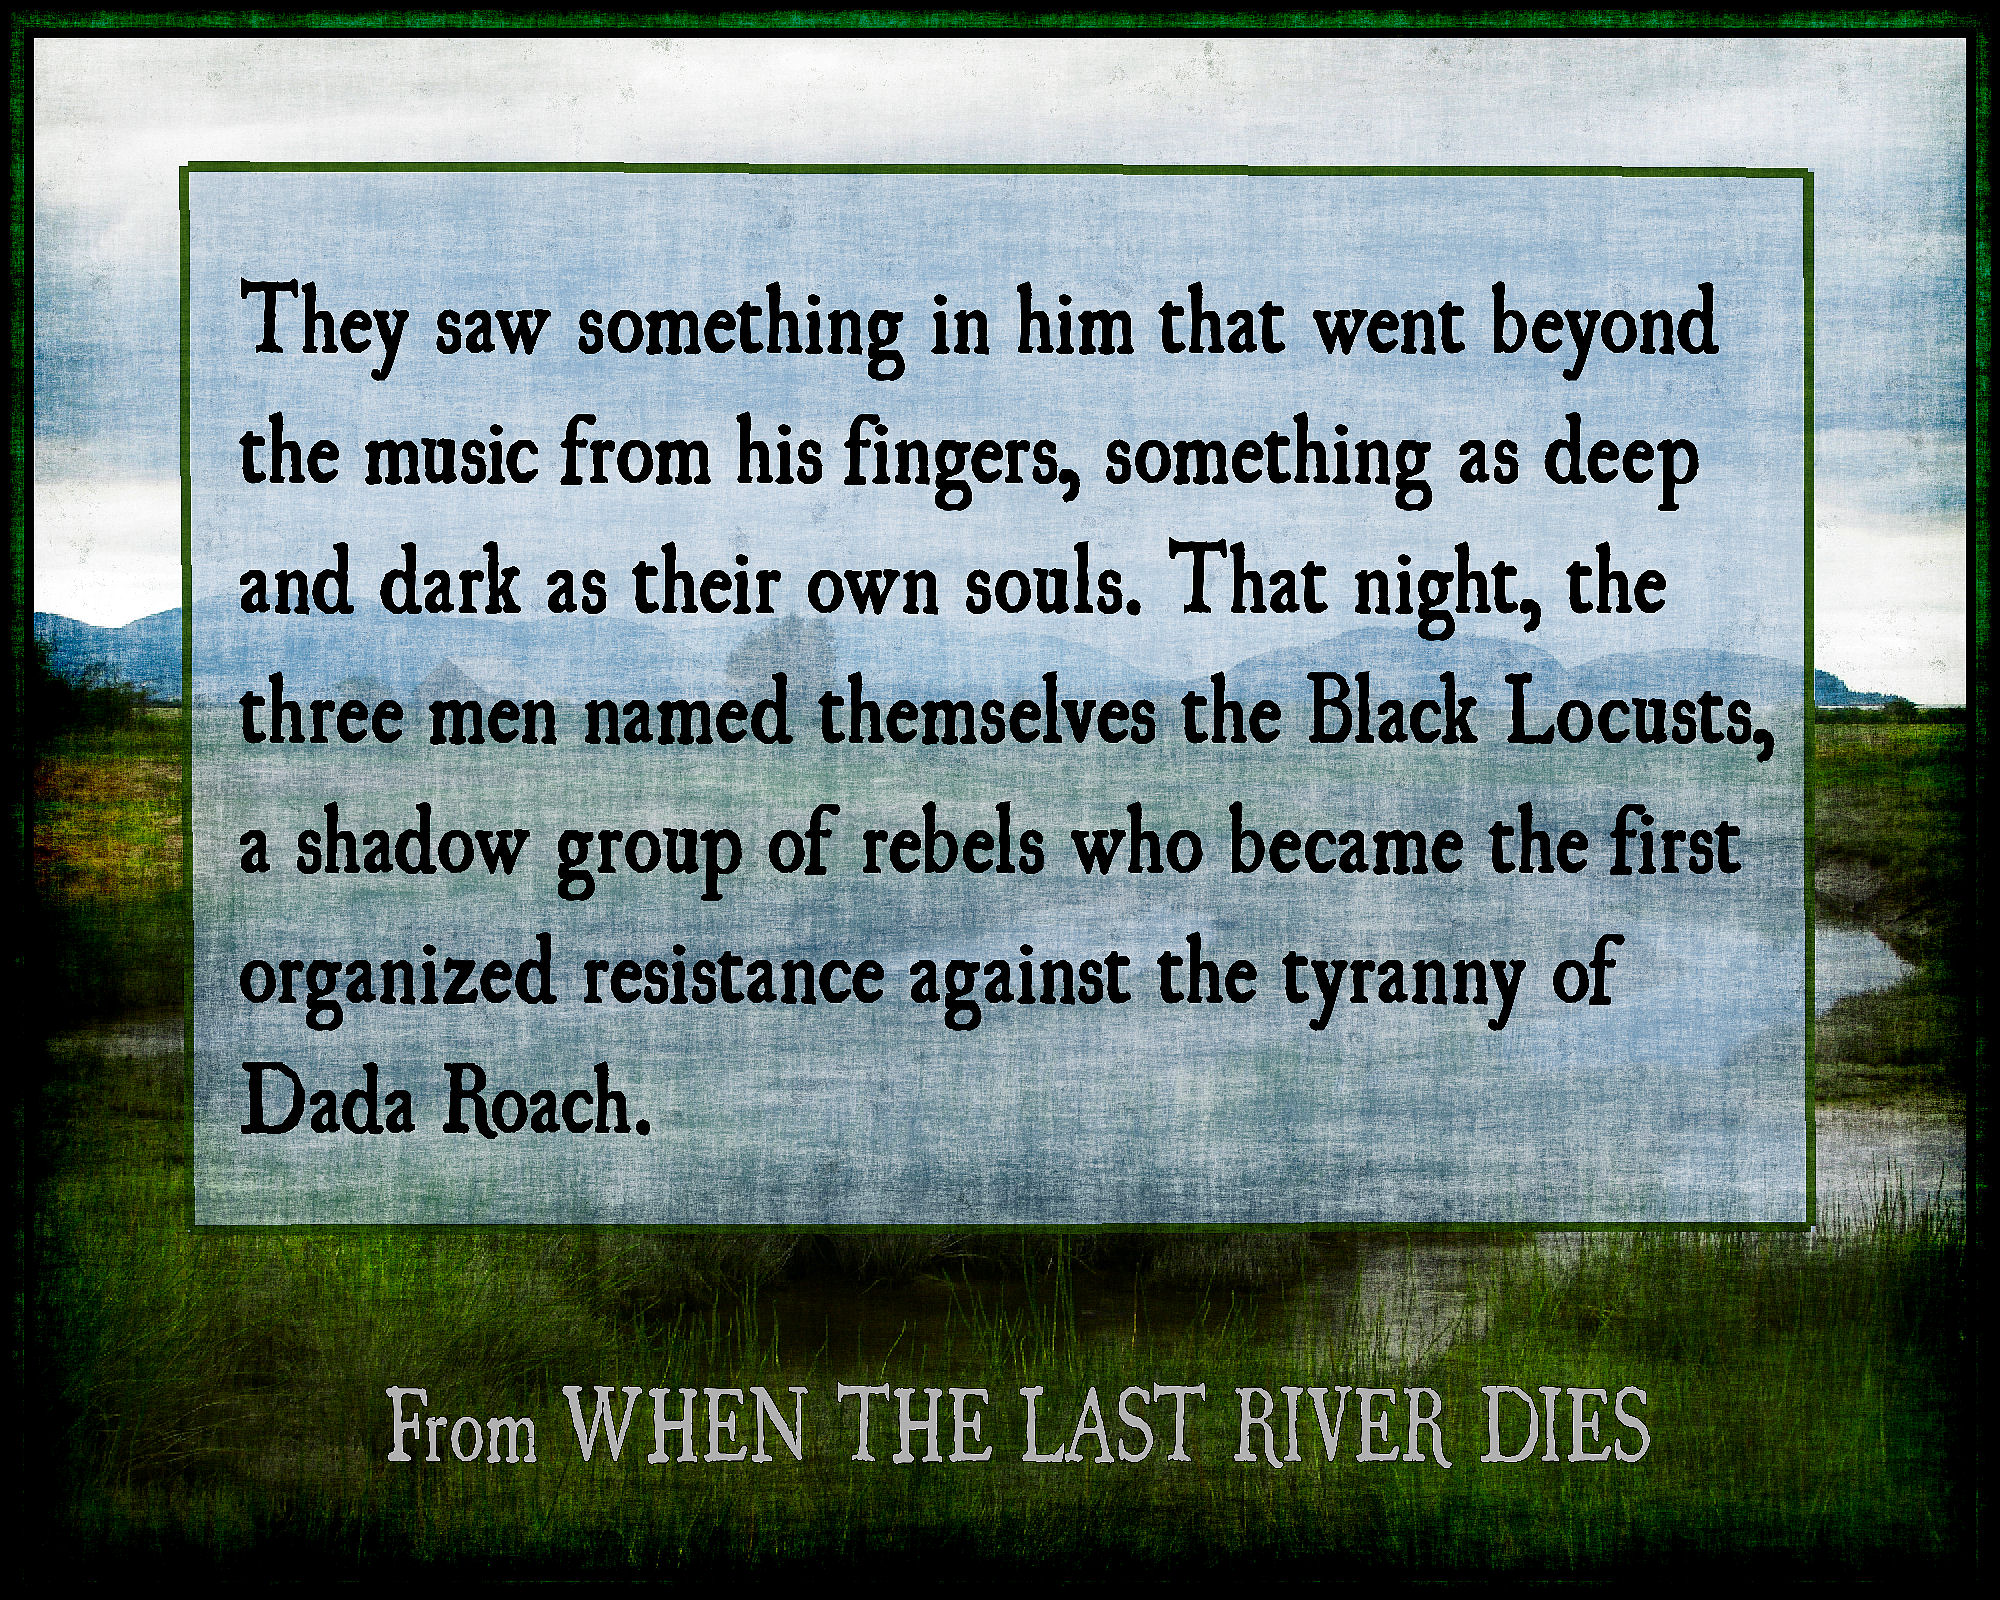 quote from Kate Taylor's dystopian fiction novel WHEN THE LAST RIVER DIES